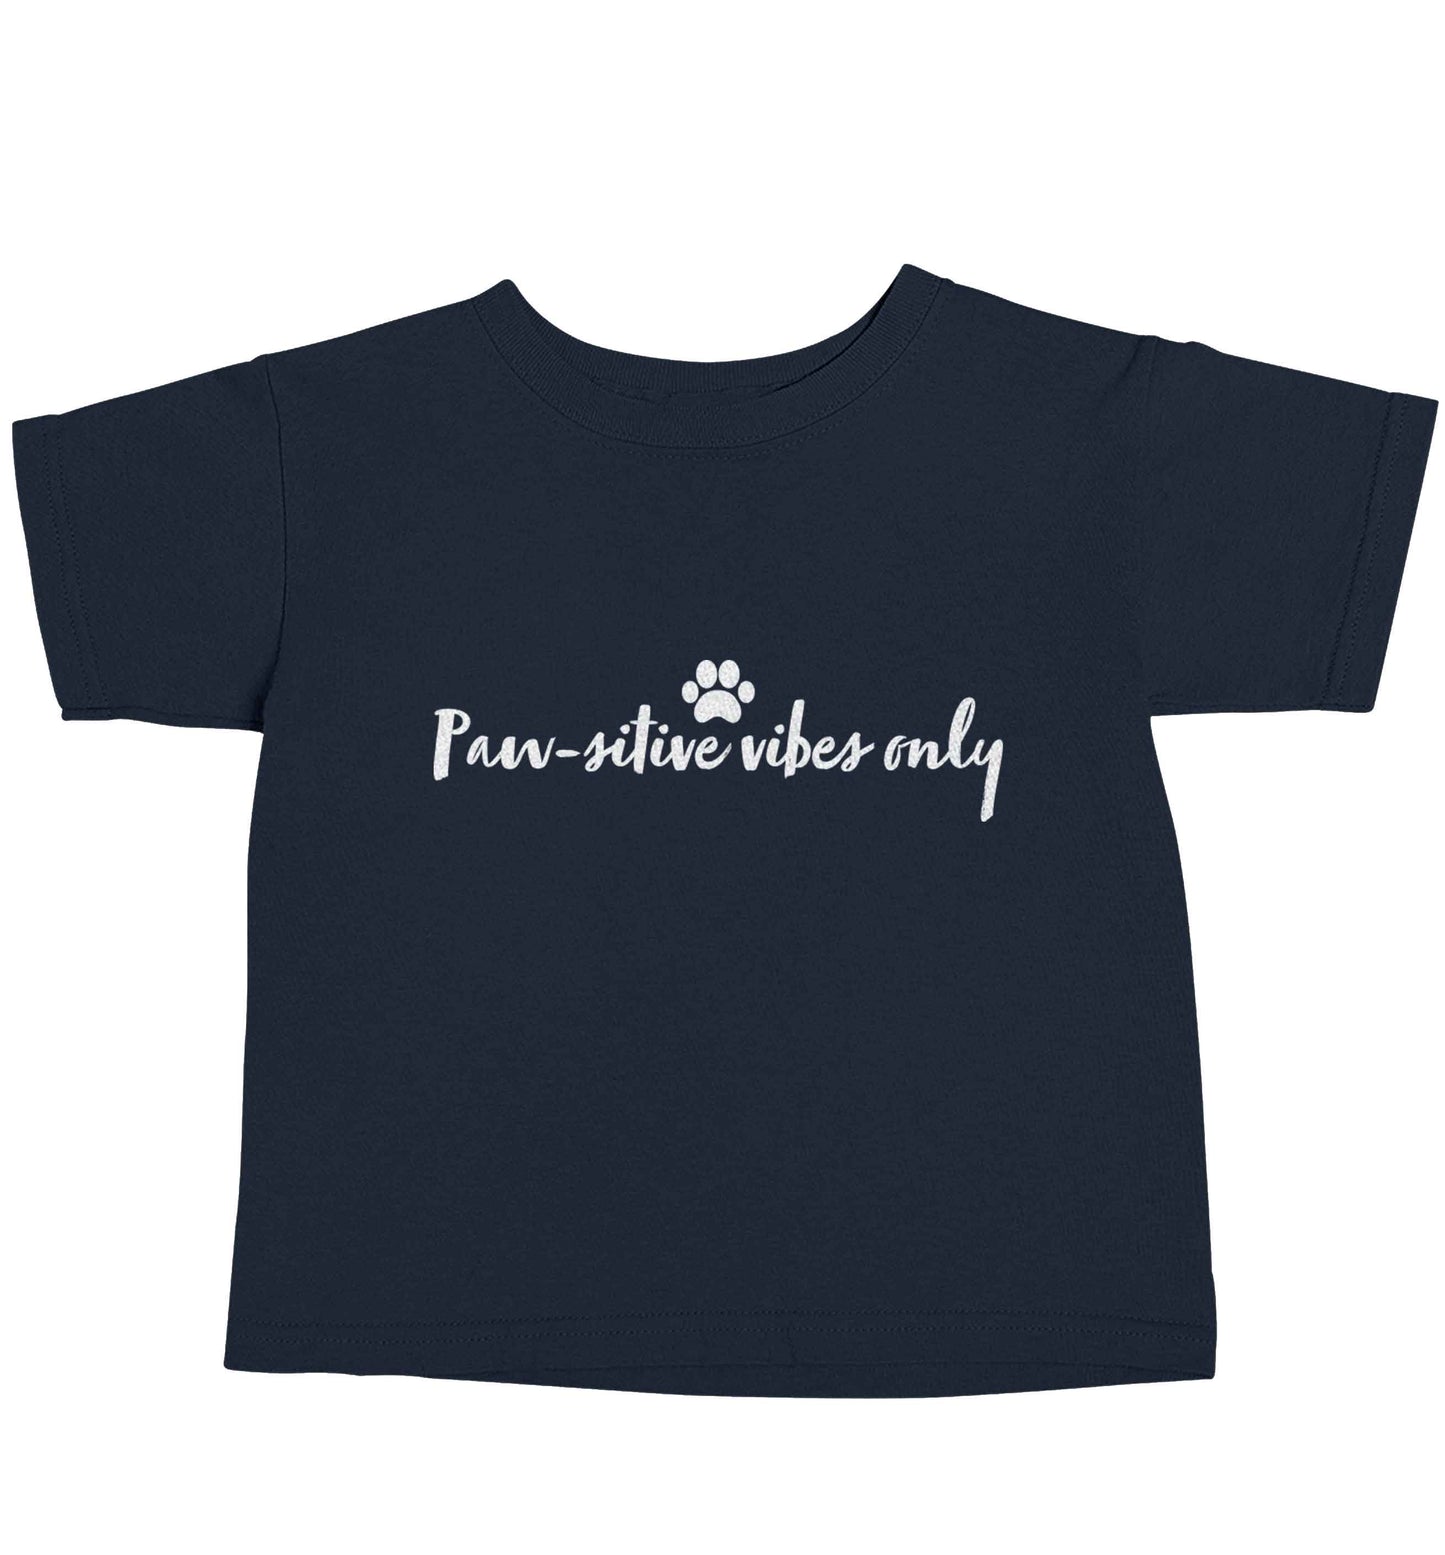 Pawsitive vibes only Kit navy baby toddler Tshirt 2 Years